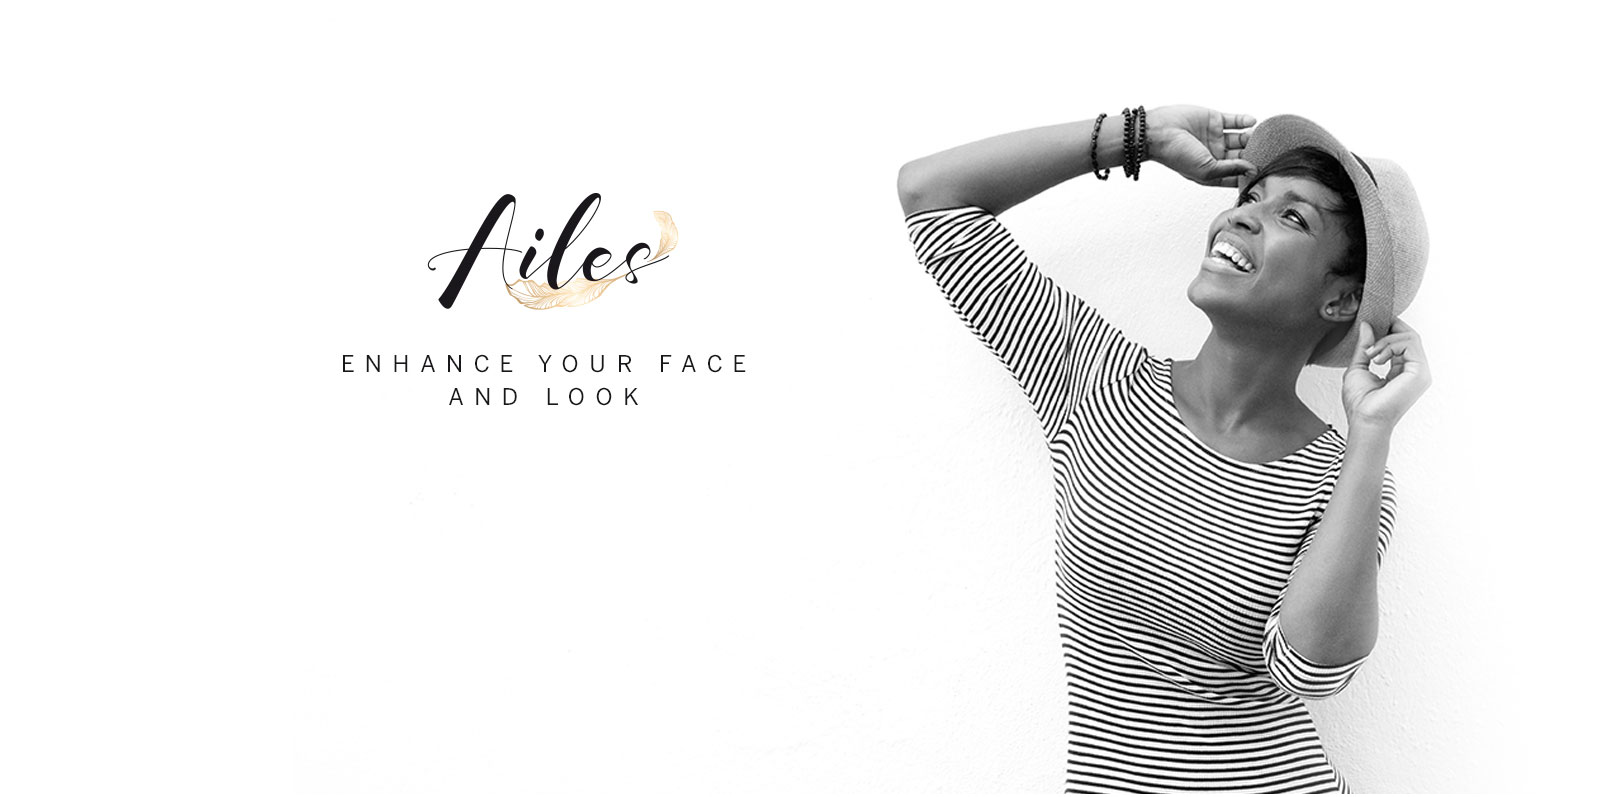 Enhance your face and look